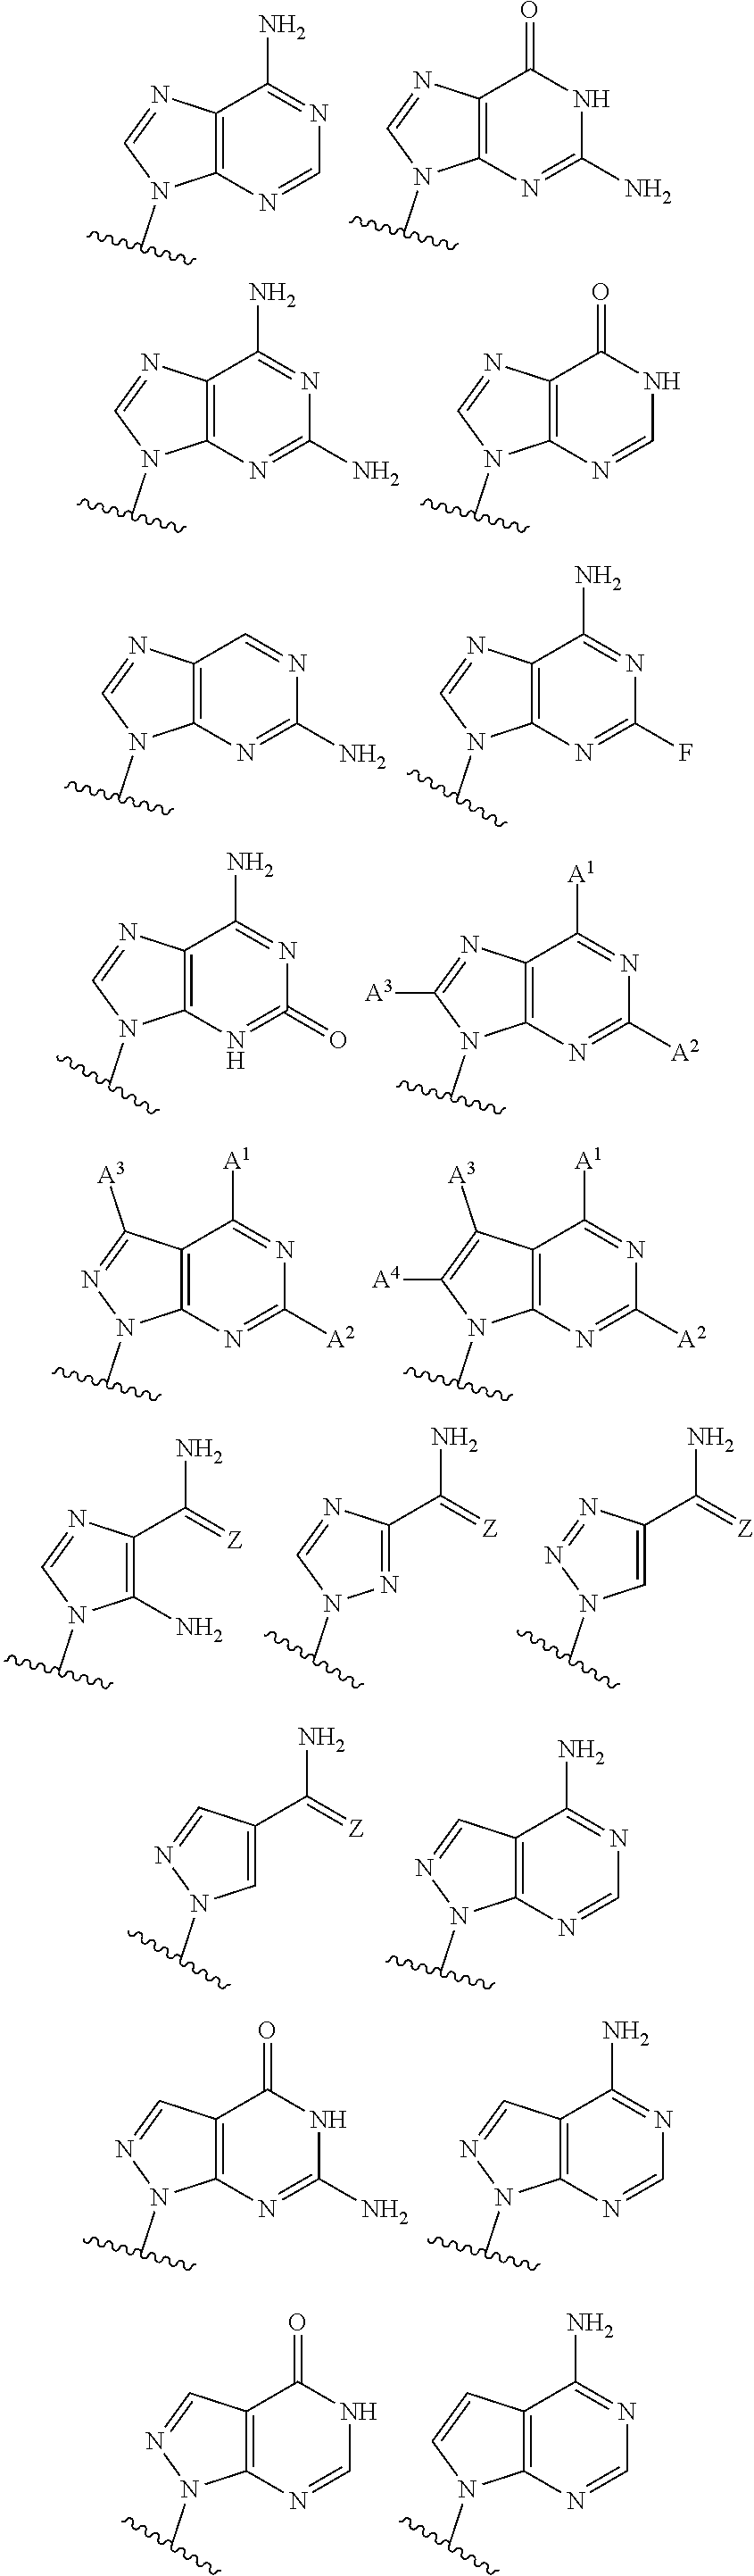 3'3'-cyclic dinucleotide analogue comprising a cyclopentanyl modified nucleotide as sting modulator